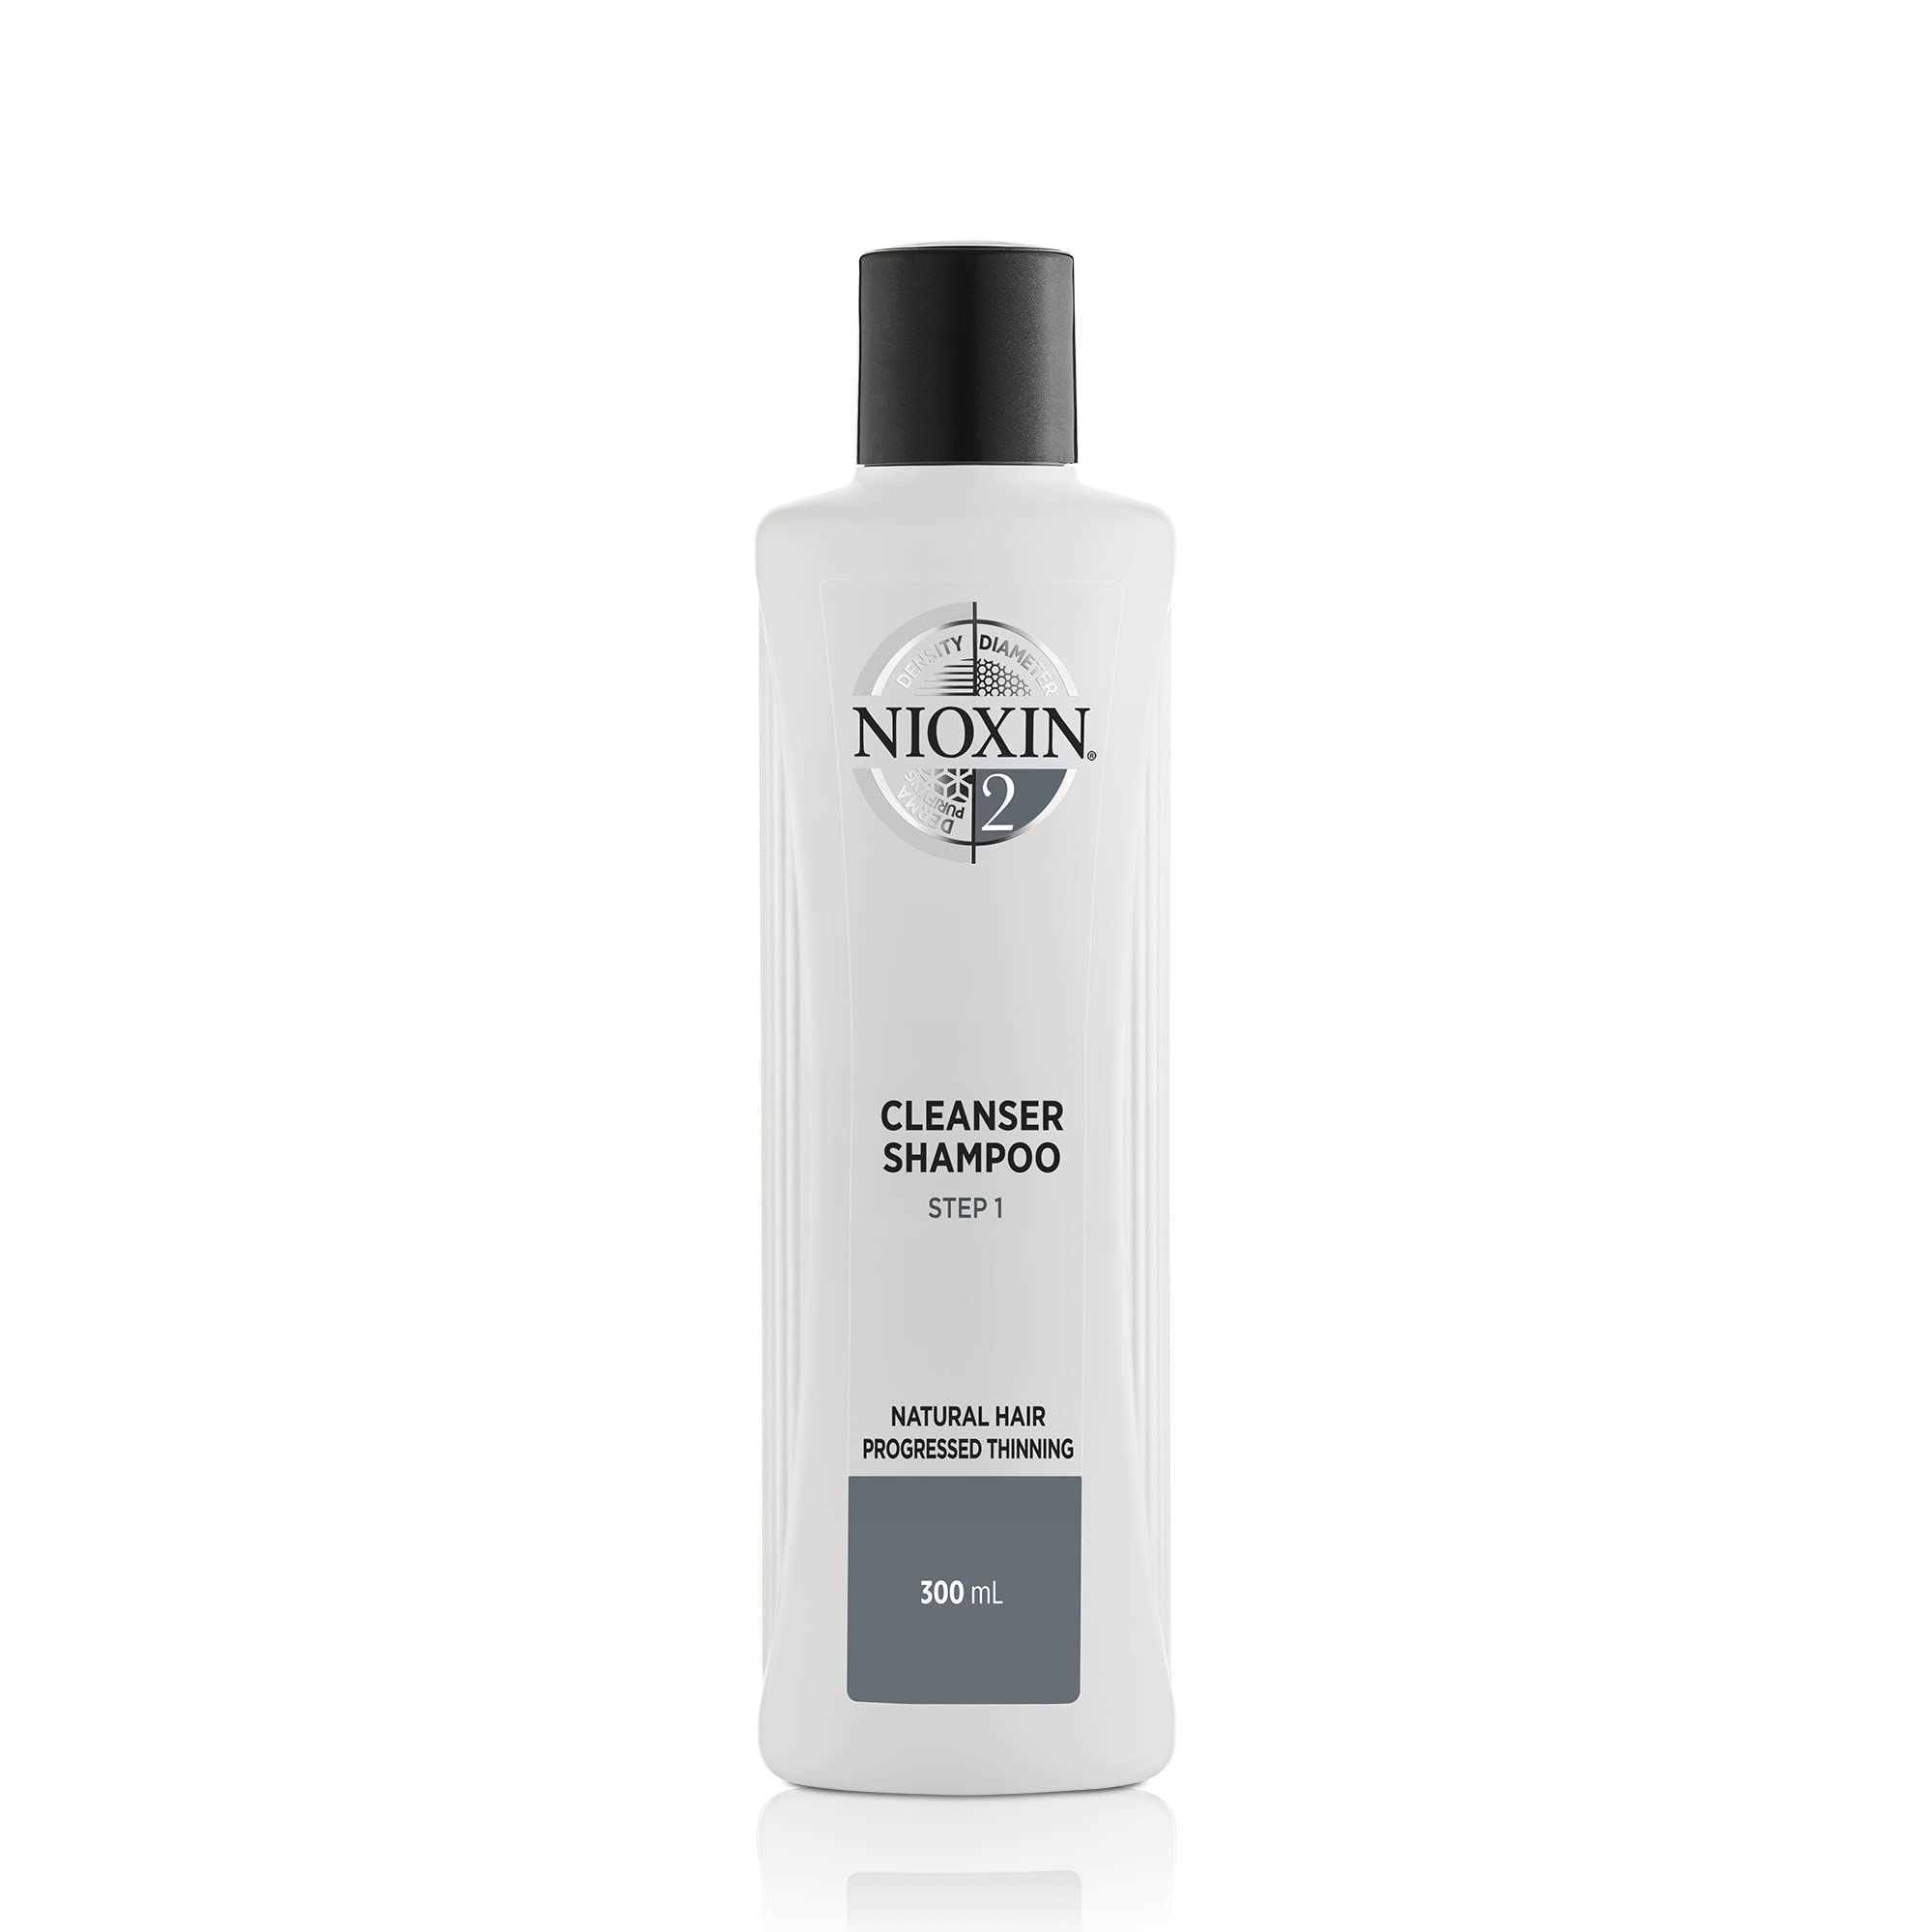 Nioxin System 2, Cleansing Shampoo With Peppermint Oil, Treats Sensitive Scalp & Provides Moisture, For Natural Hair with Progressed Thinning, Various Sizes